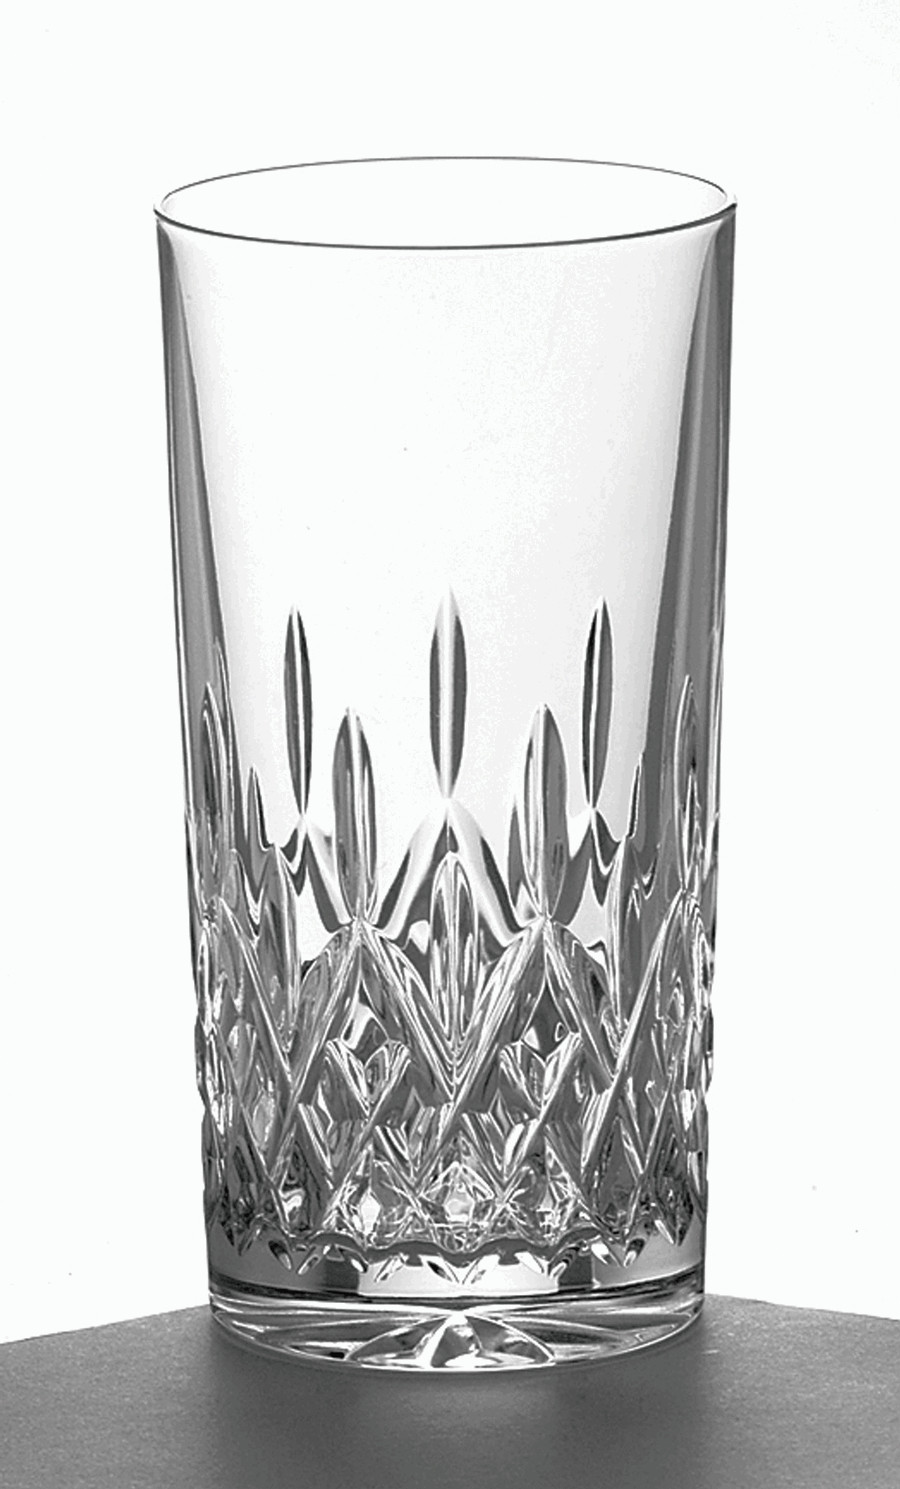 Waterford Lismore Diamond Vase Of Galway Crystal Longford Set Of 2 Tumblers D O F with Regard to Galway Crystal Longford Large Hiball Pair Gifts Pub Stuff Glassware at Irish On Grand